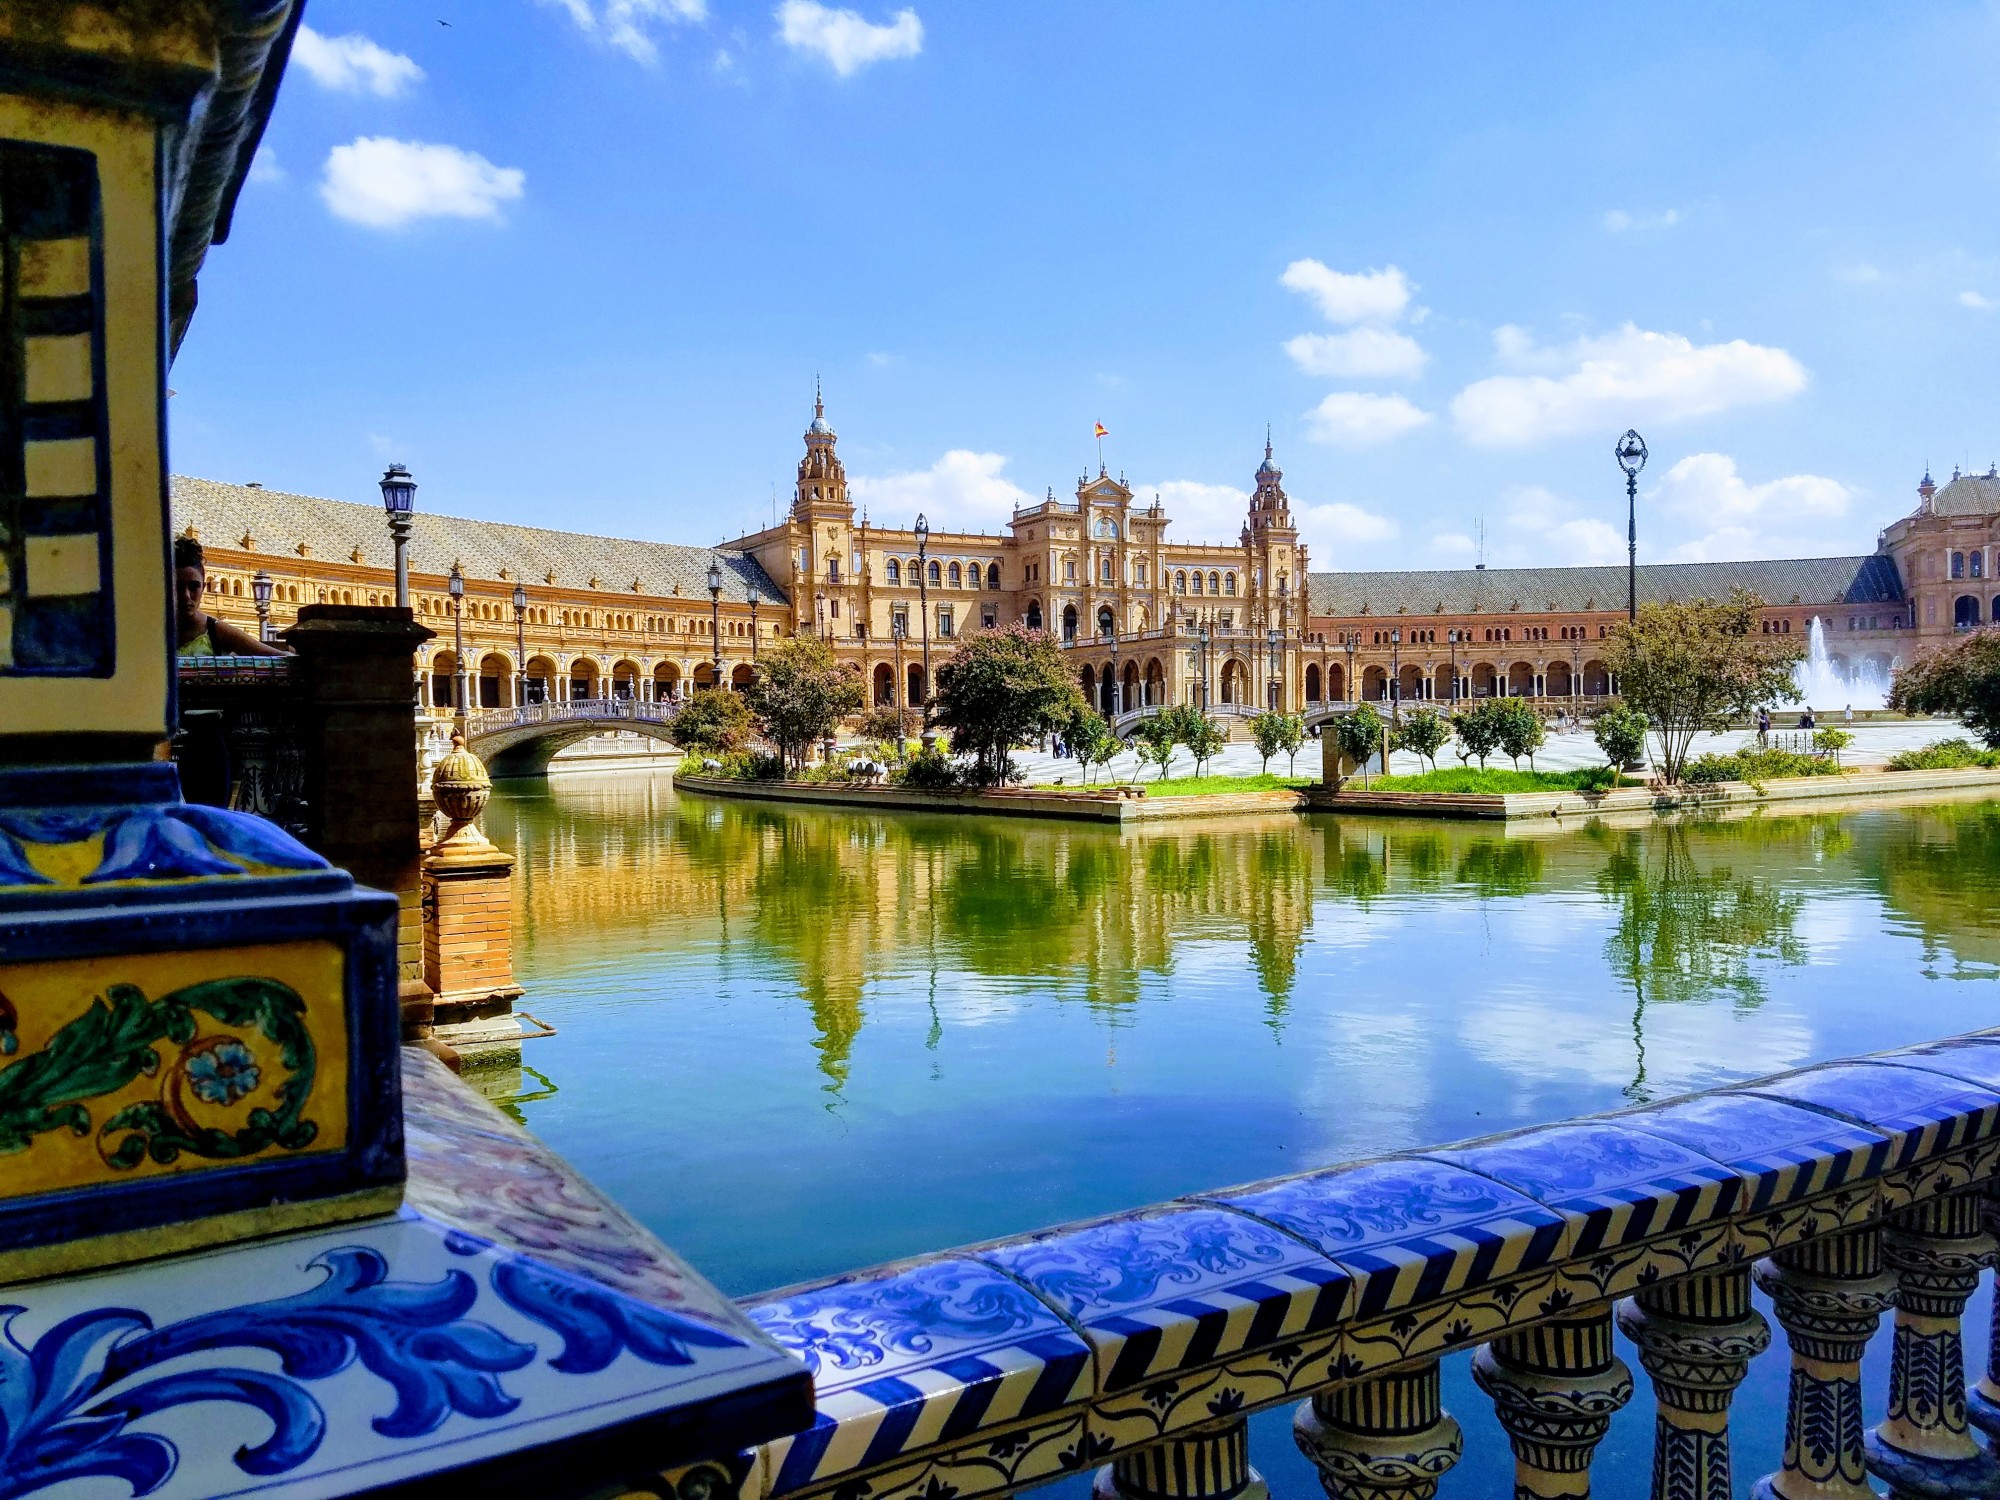 The Plaza de España is proof that Seville is too beautiful